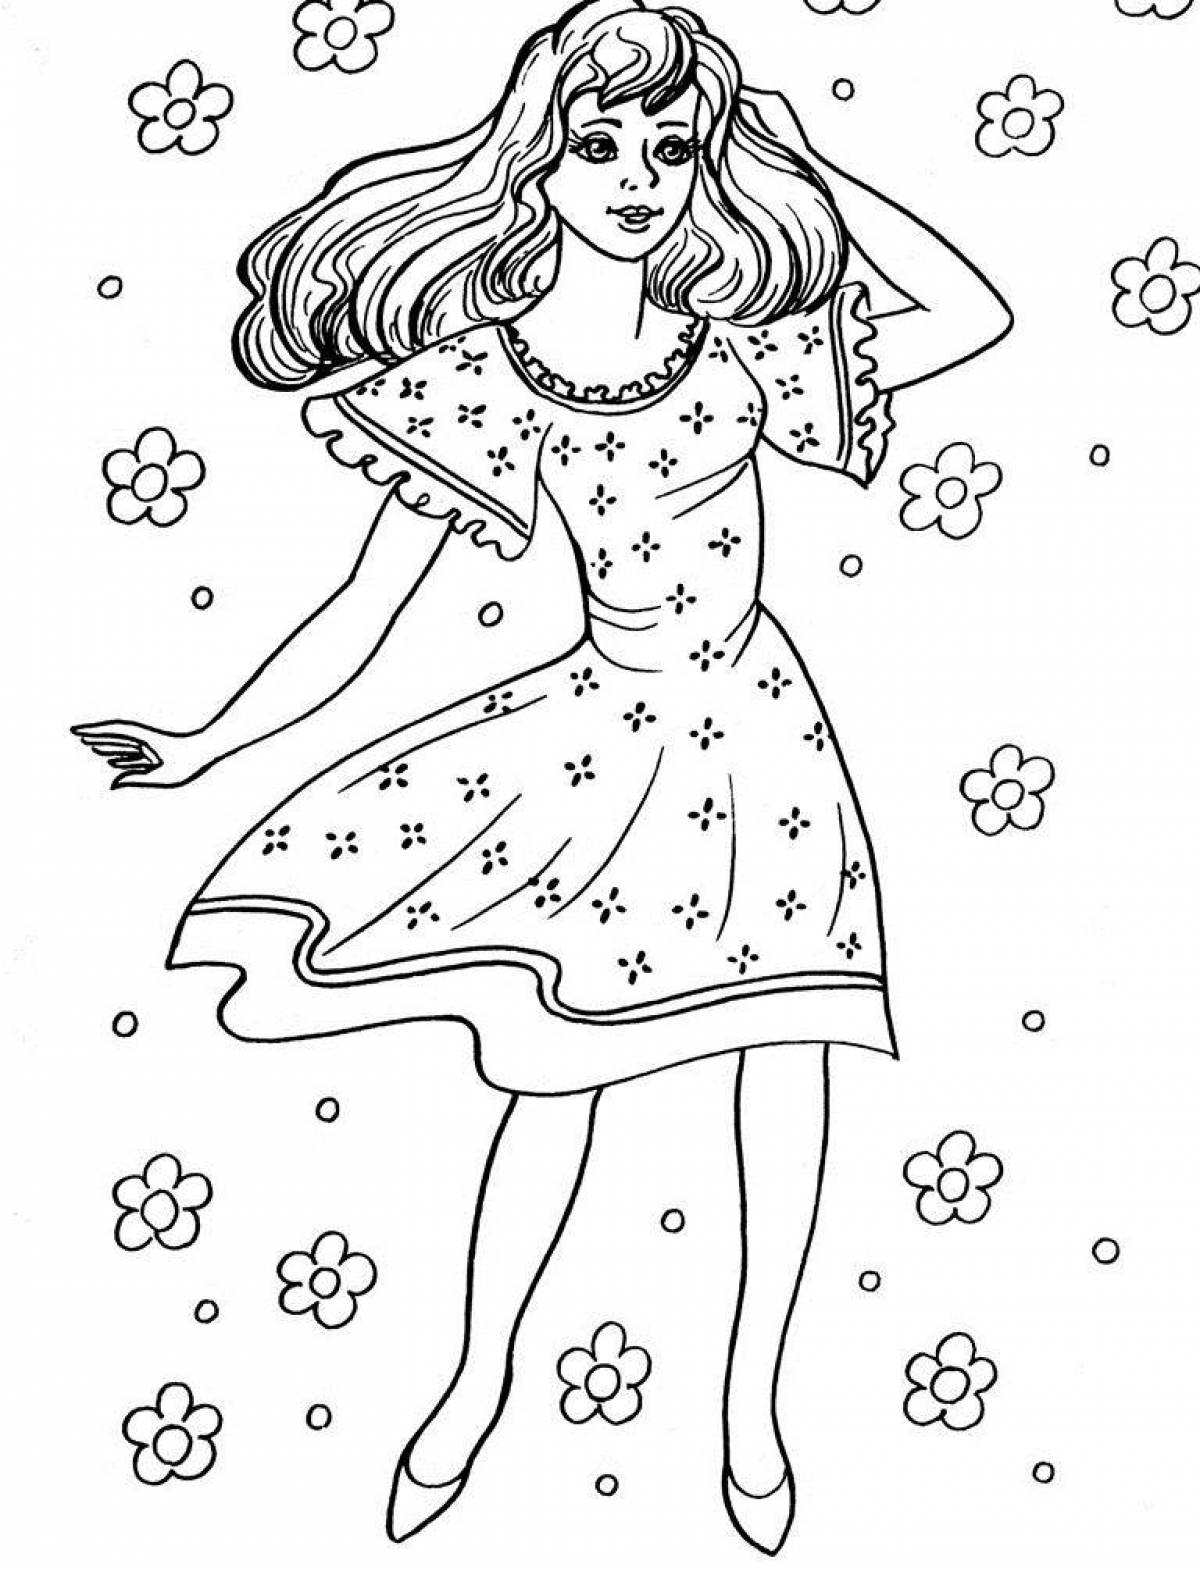 Amazing coloring book for girls pdf